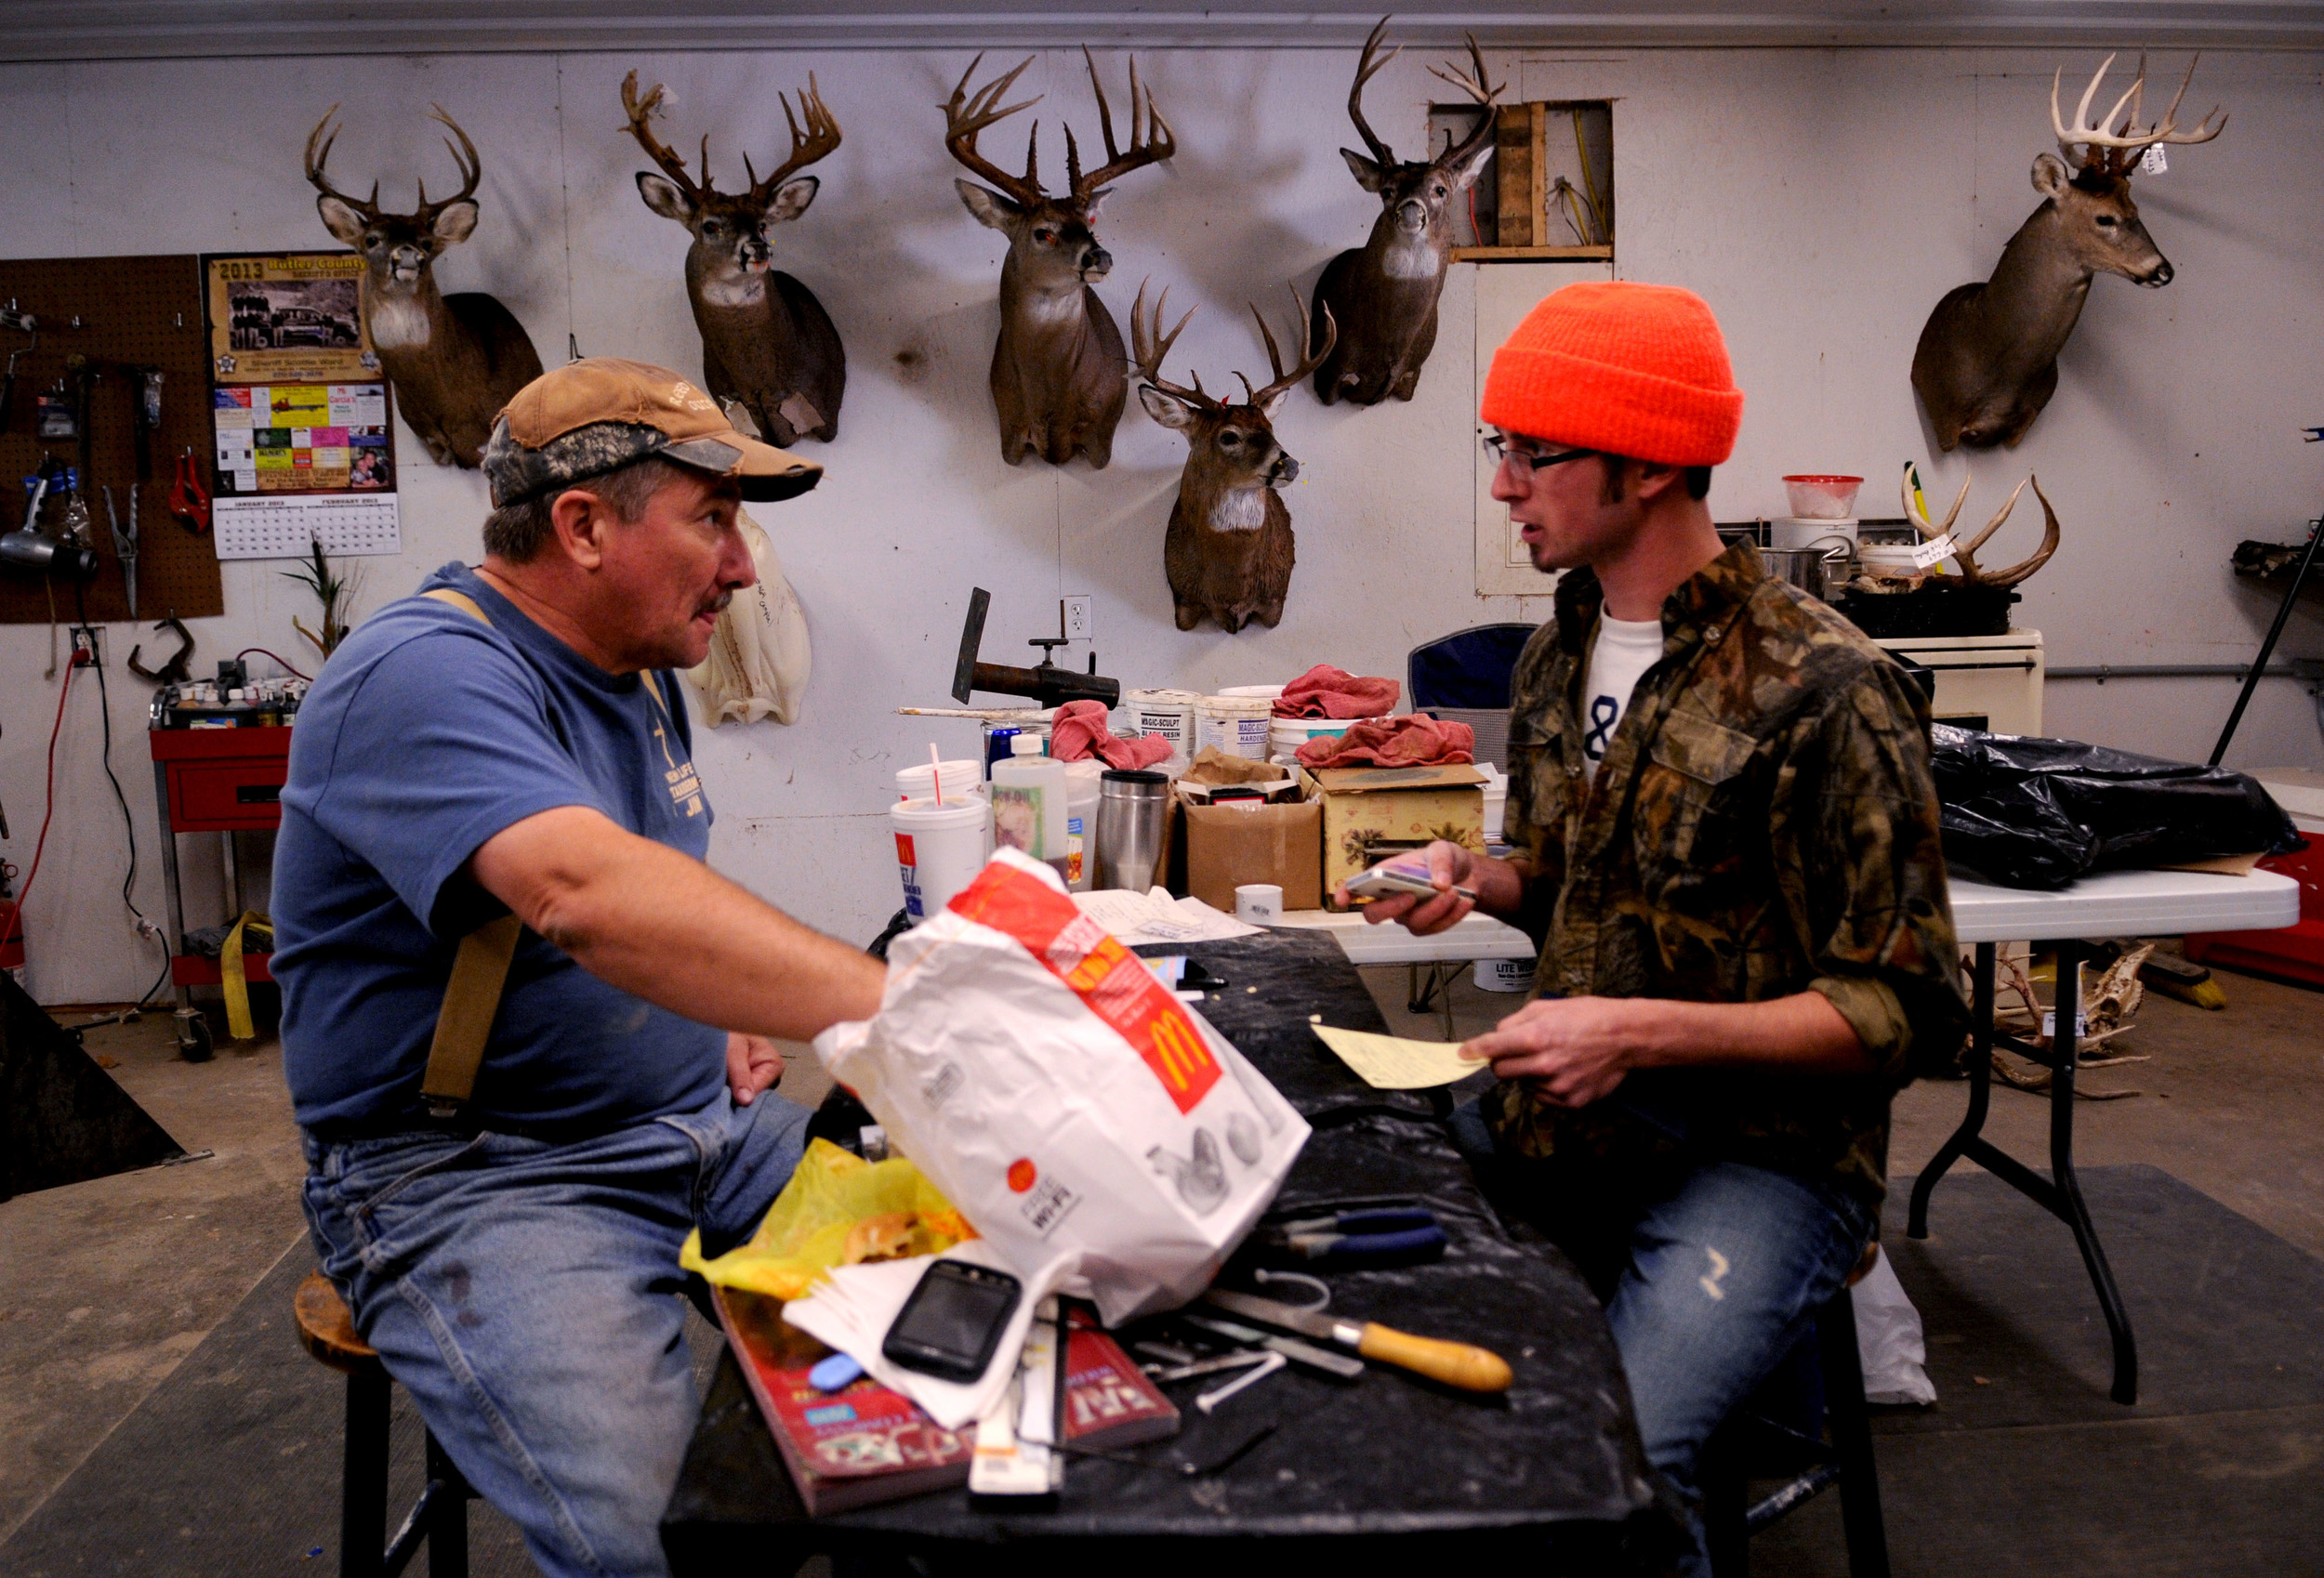  Jim McIntosh (left), of Morgantown, Kentucky, eats lunch and talks with customer Justus Eaton (right), on Friday, November sixteenth, about the specifics of what kind of deer mount he would like. Eaton traveled from North Carolina specifically to hu